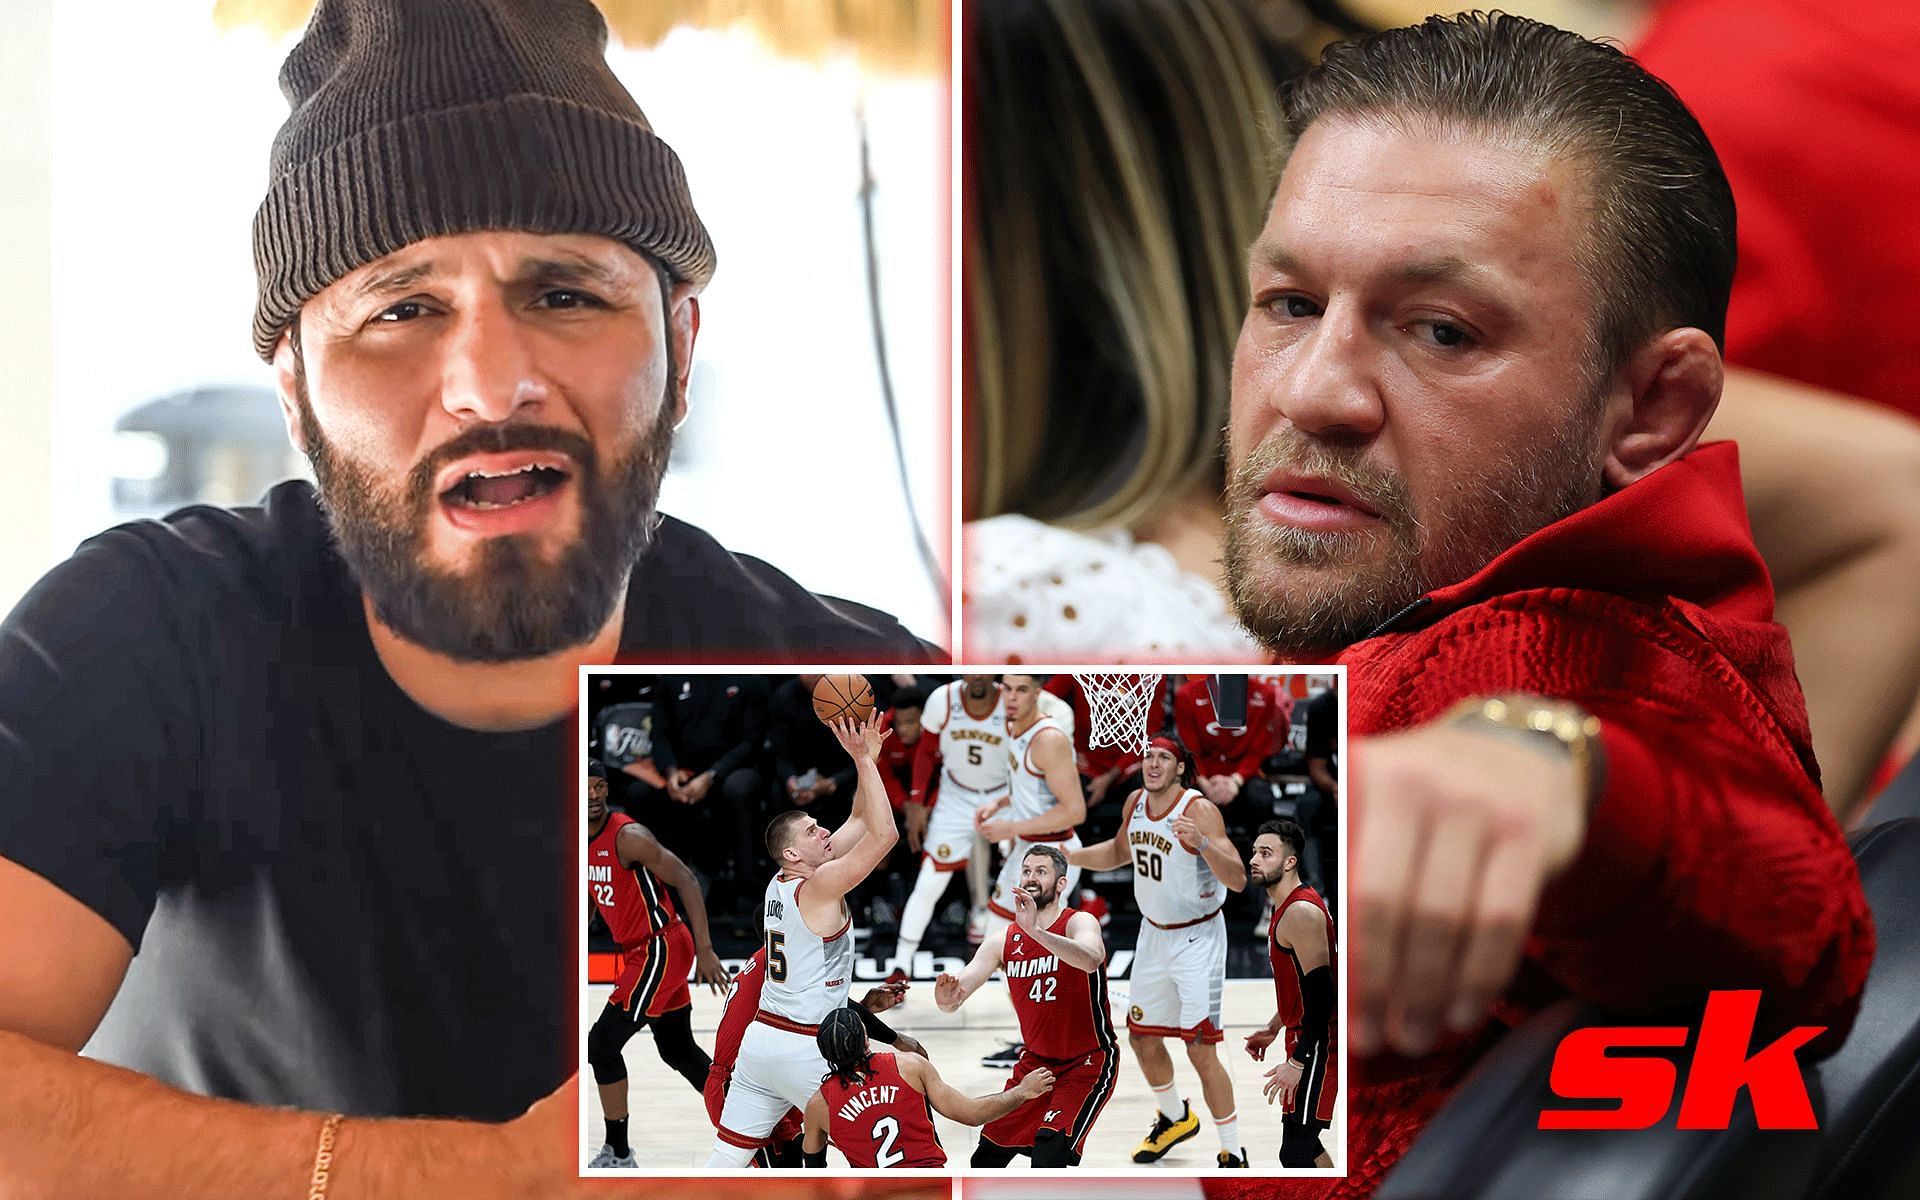 Jorge Masvidal lashes out at Conor McGregor after Miami Heat vs. Denver Nuggets NBA Finals [Image courtesy: Getty, @gamebredfighter on Instagram]